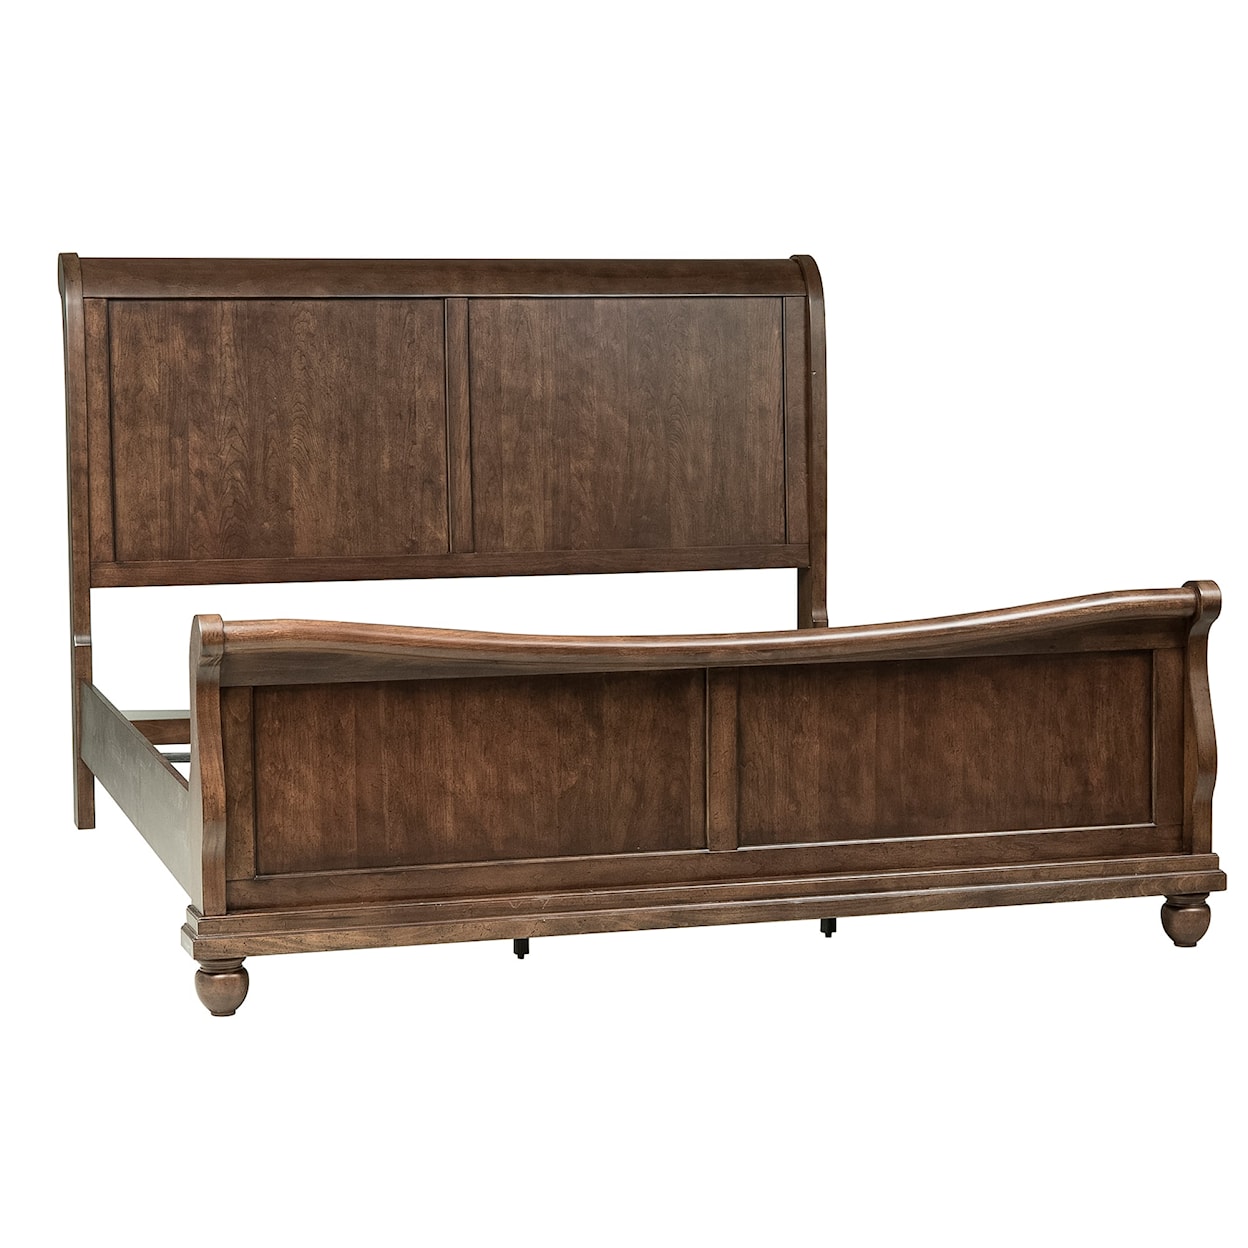 Liberty Furniture Rustic Traditions Queen Sleigh Bed 